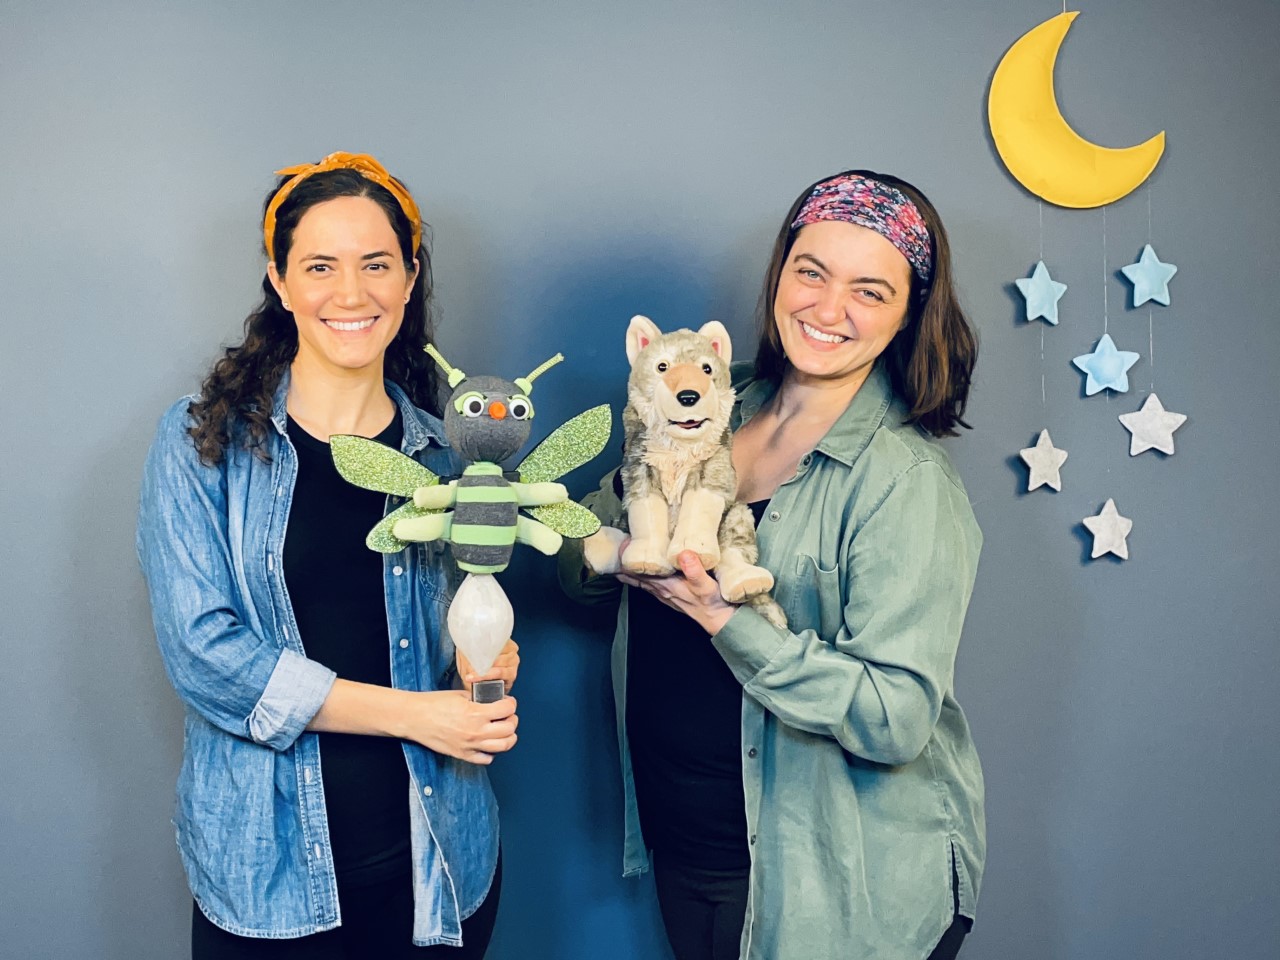 Two women, each holding a puppet.  A paper moon hangs in the background.